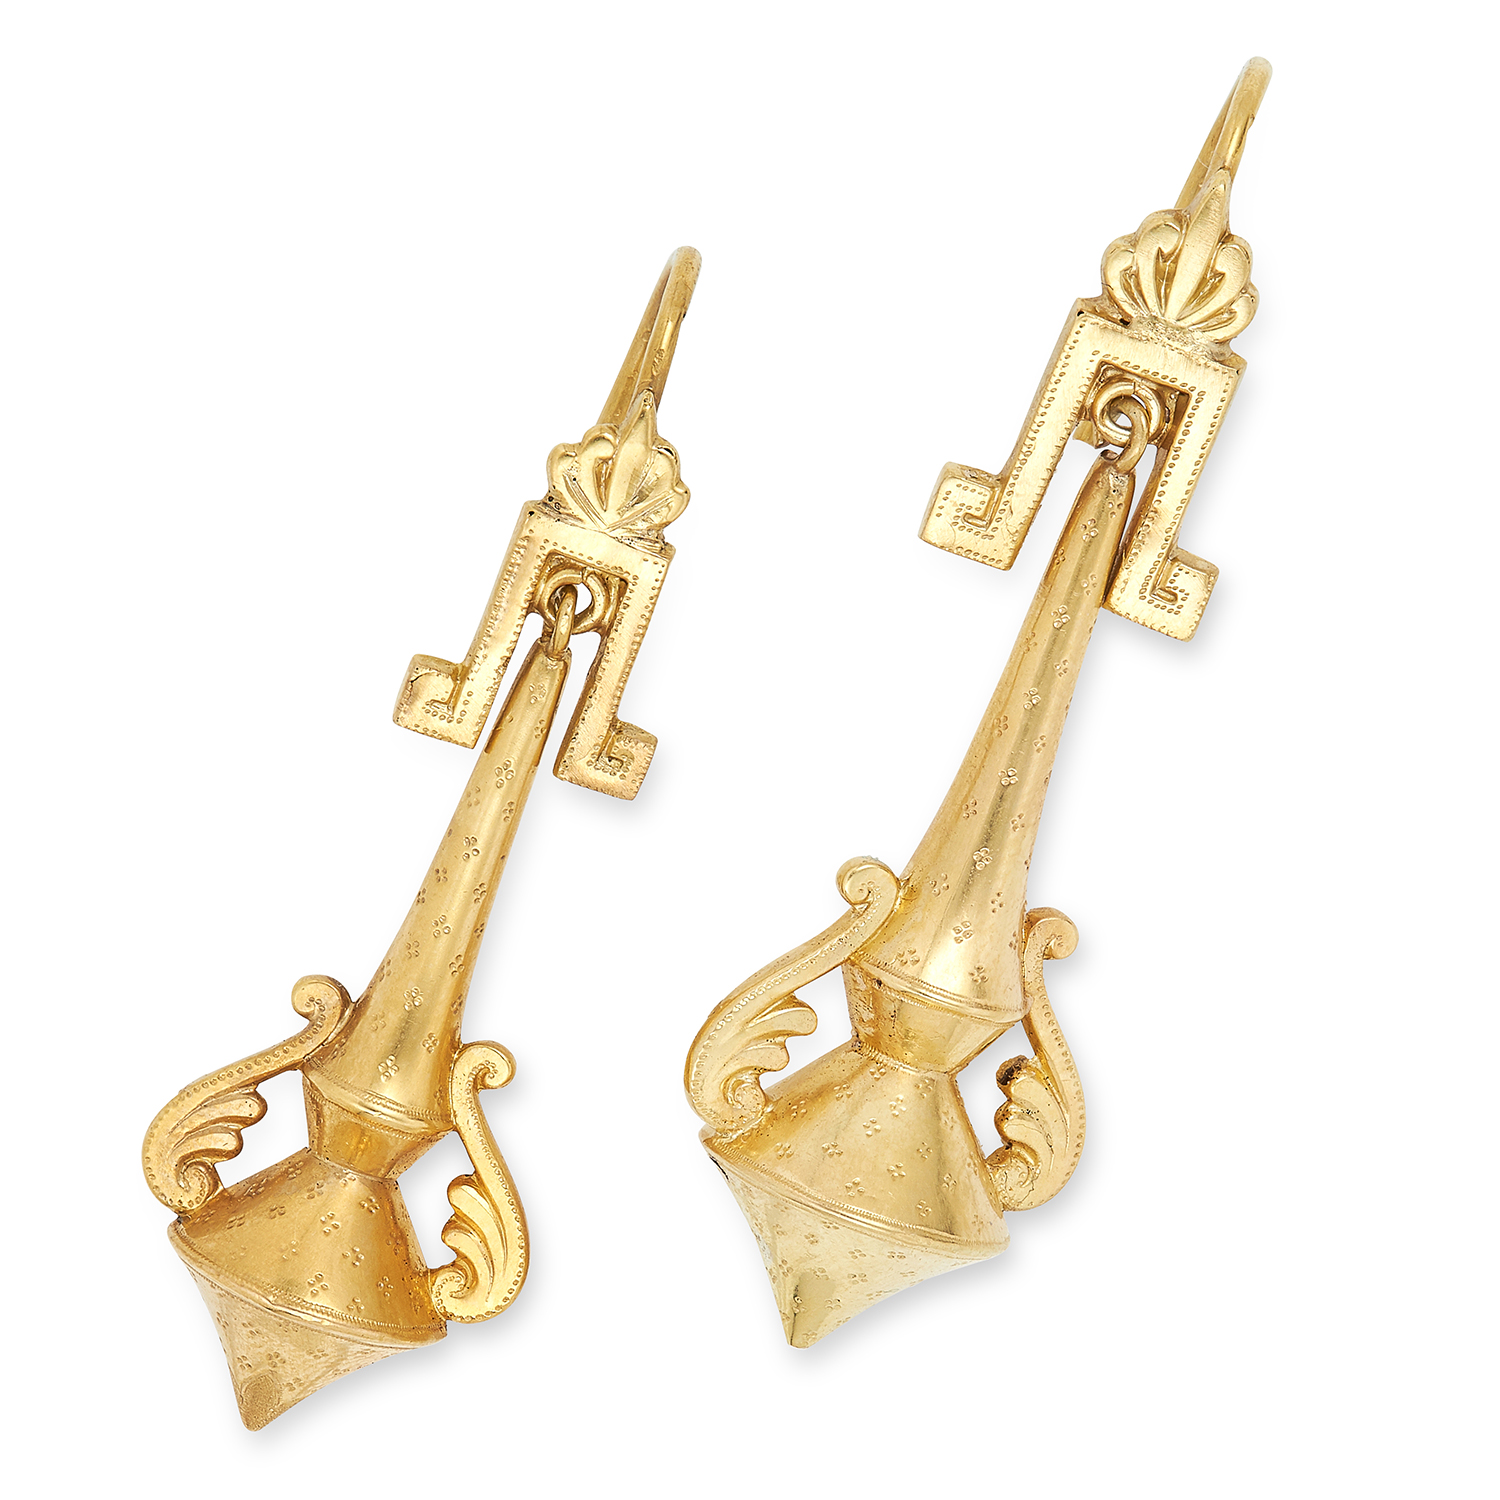 ANTIQUE ARTICULATED EARRINGS, 19TH CENTURY in the Etruscan revival manner, with geometric and